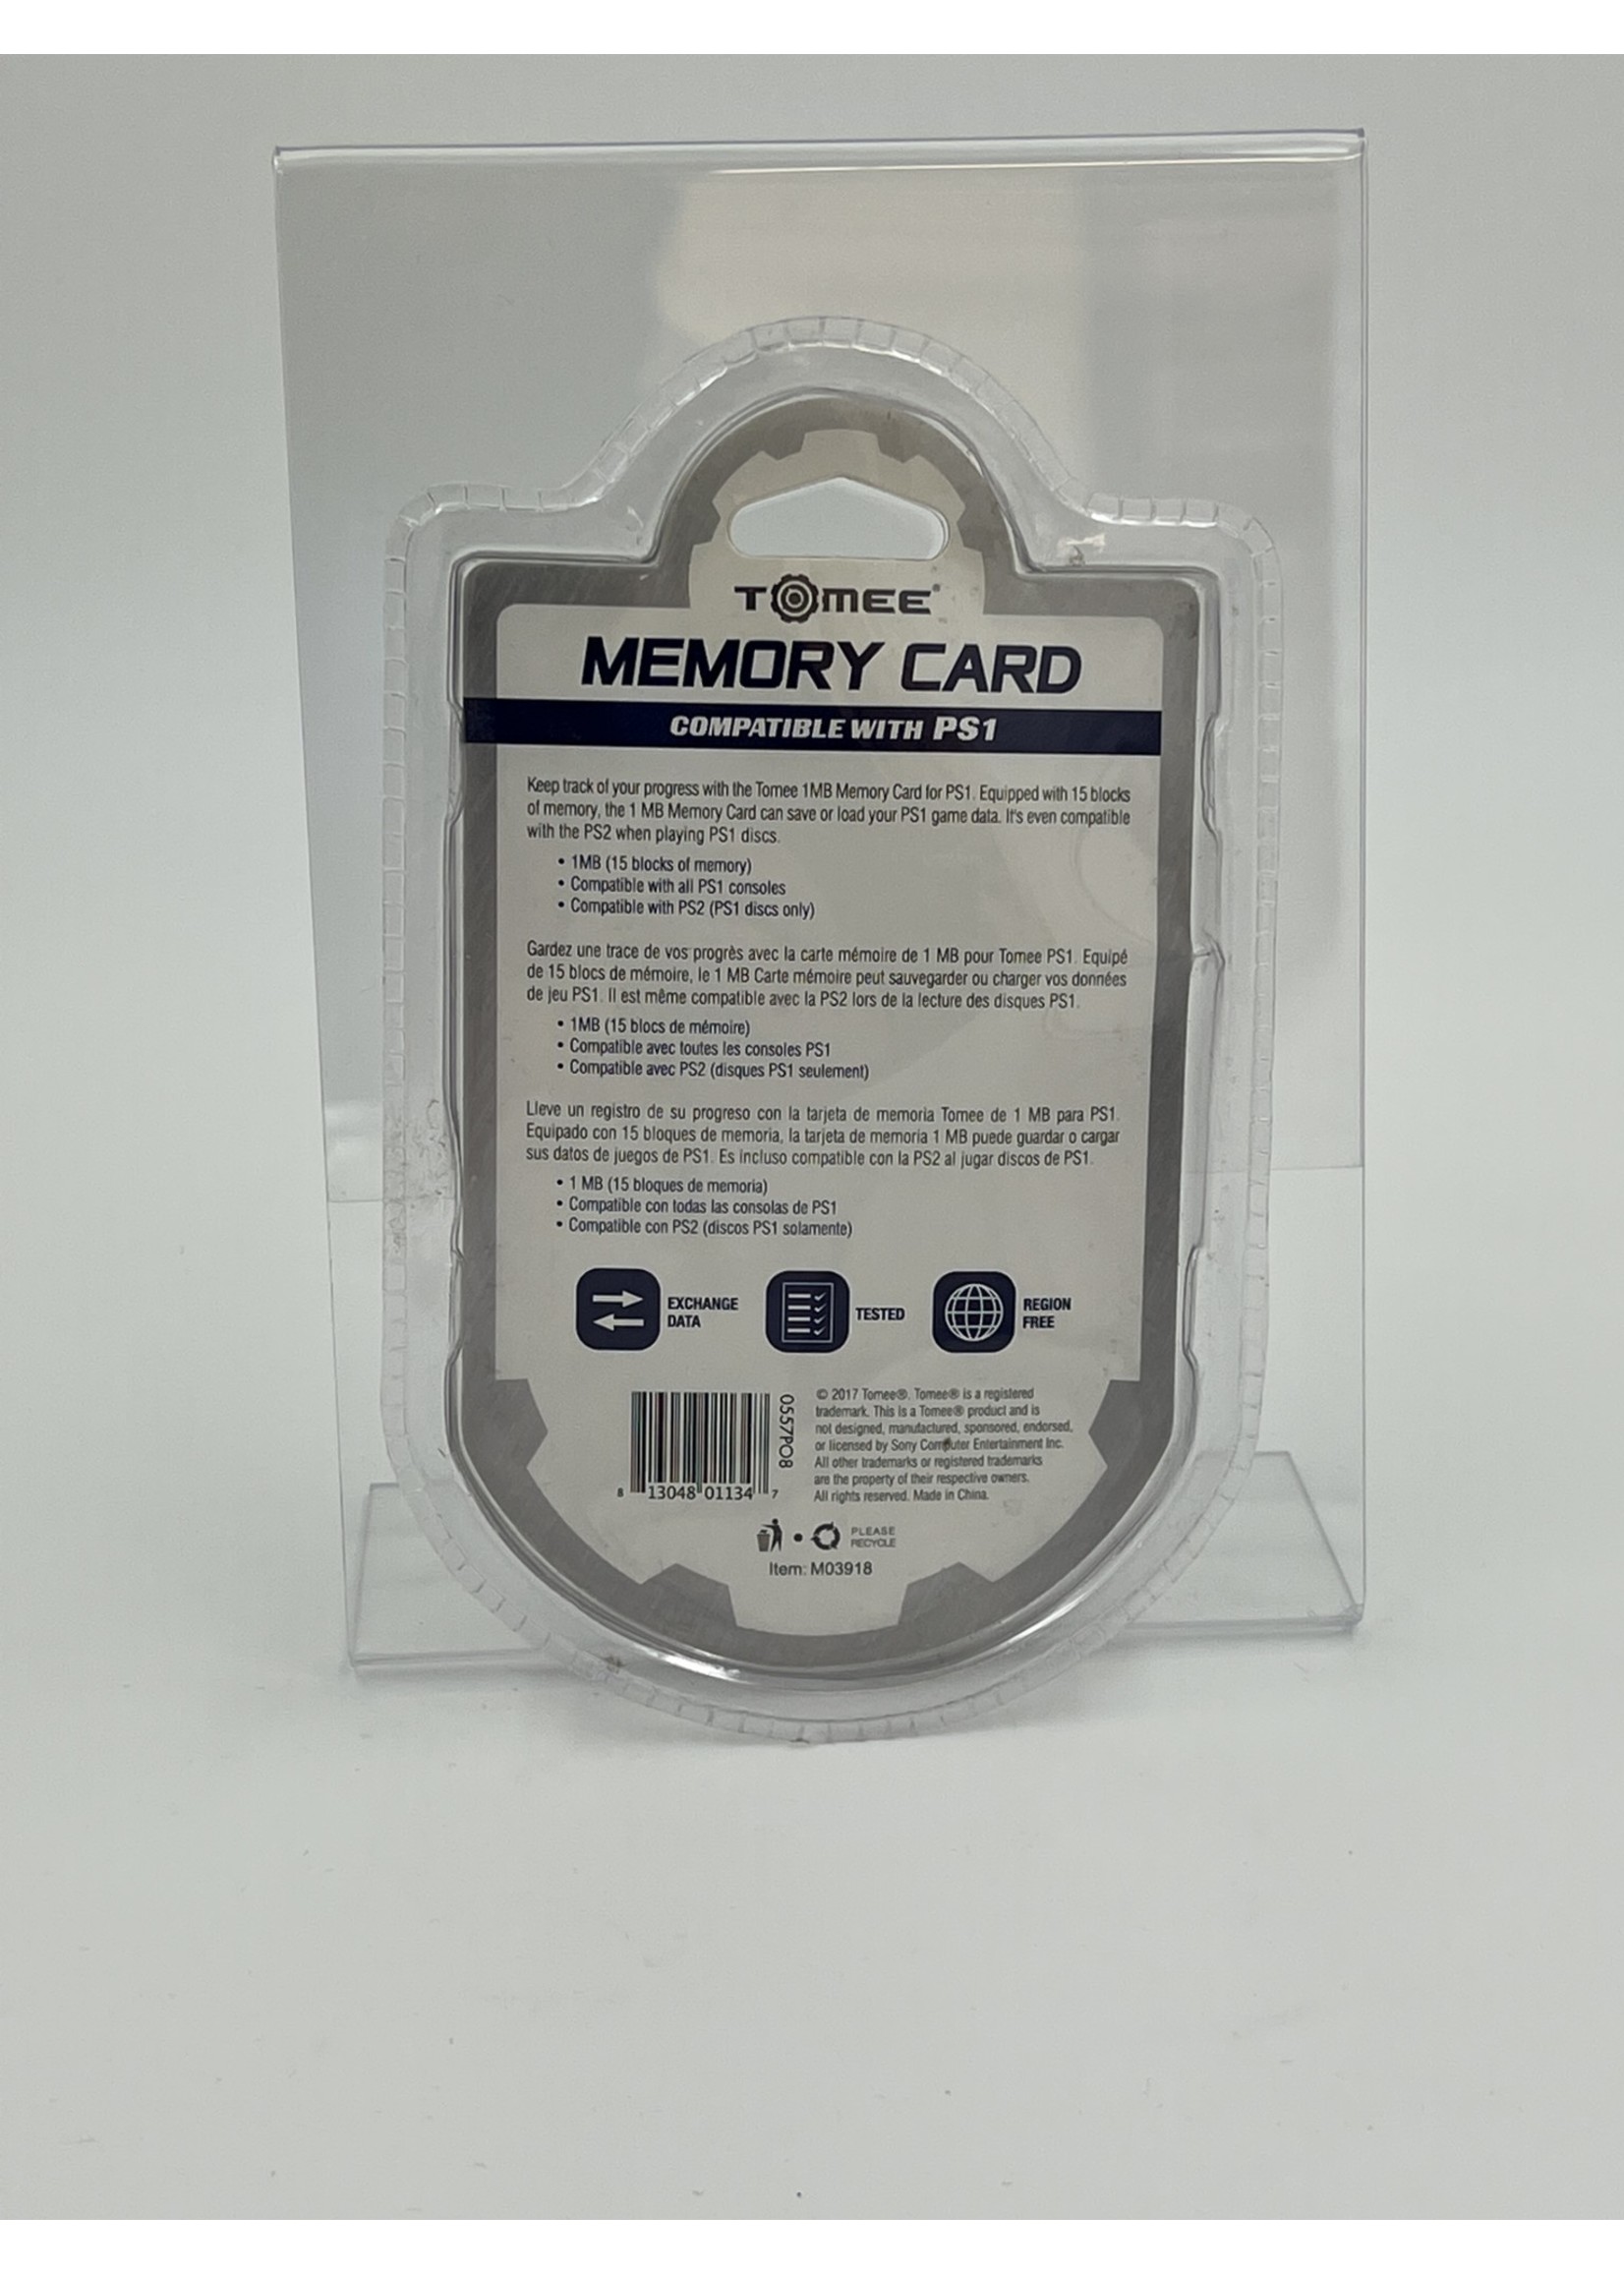 Sony Tomee Ps1 Memory Card 1Mb